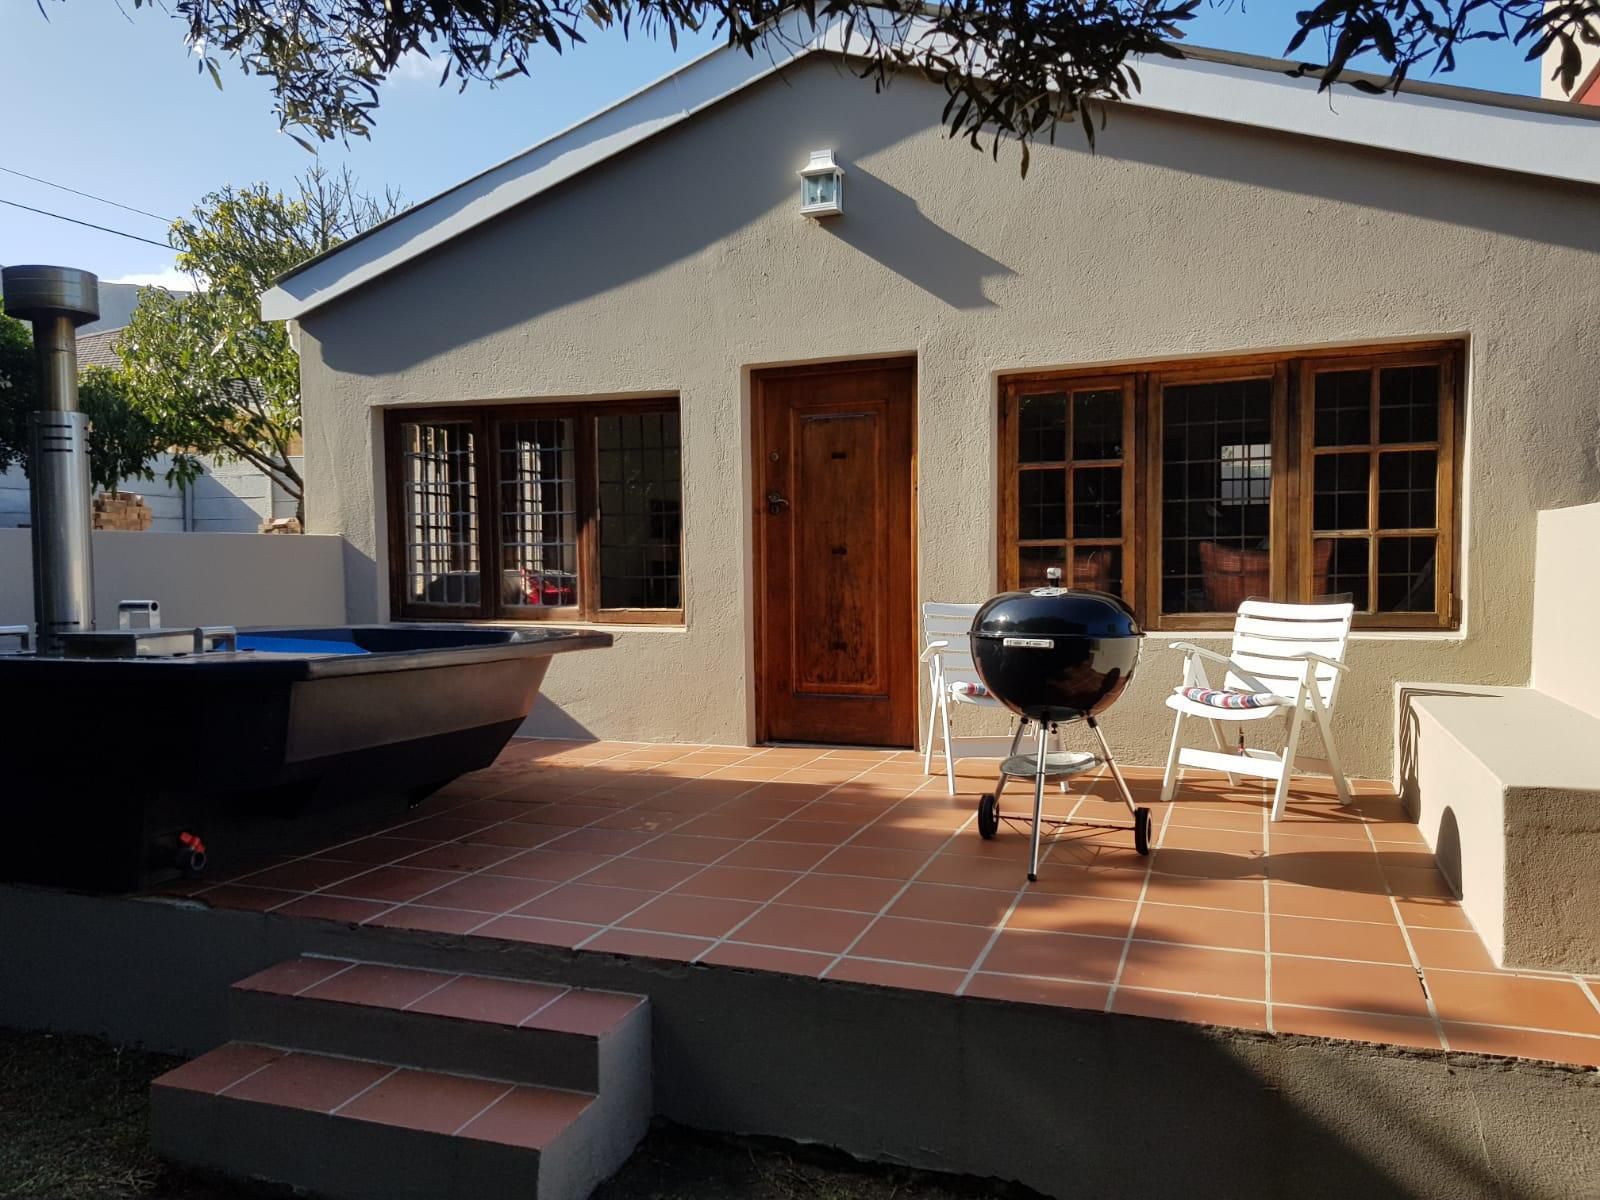 Karibu Self Catering Accommodation Vermont Za Hermanus Western Cape South Africa House, Building, Architecture, Living Room